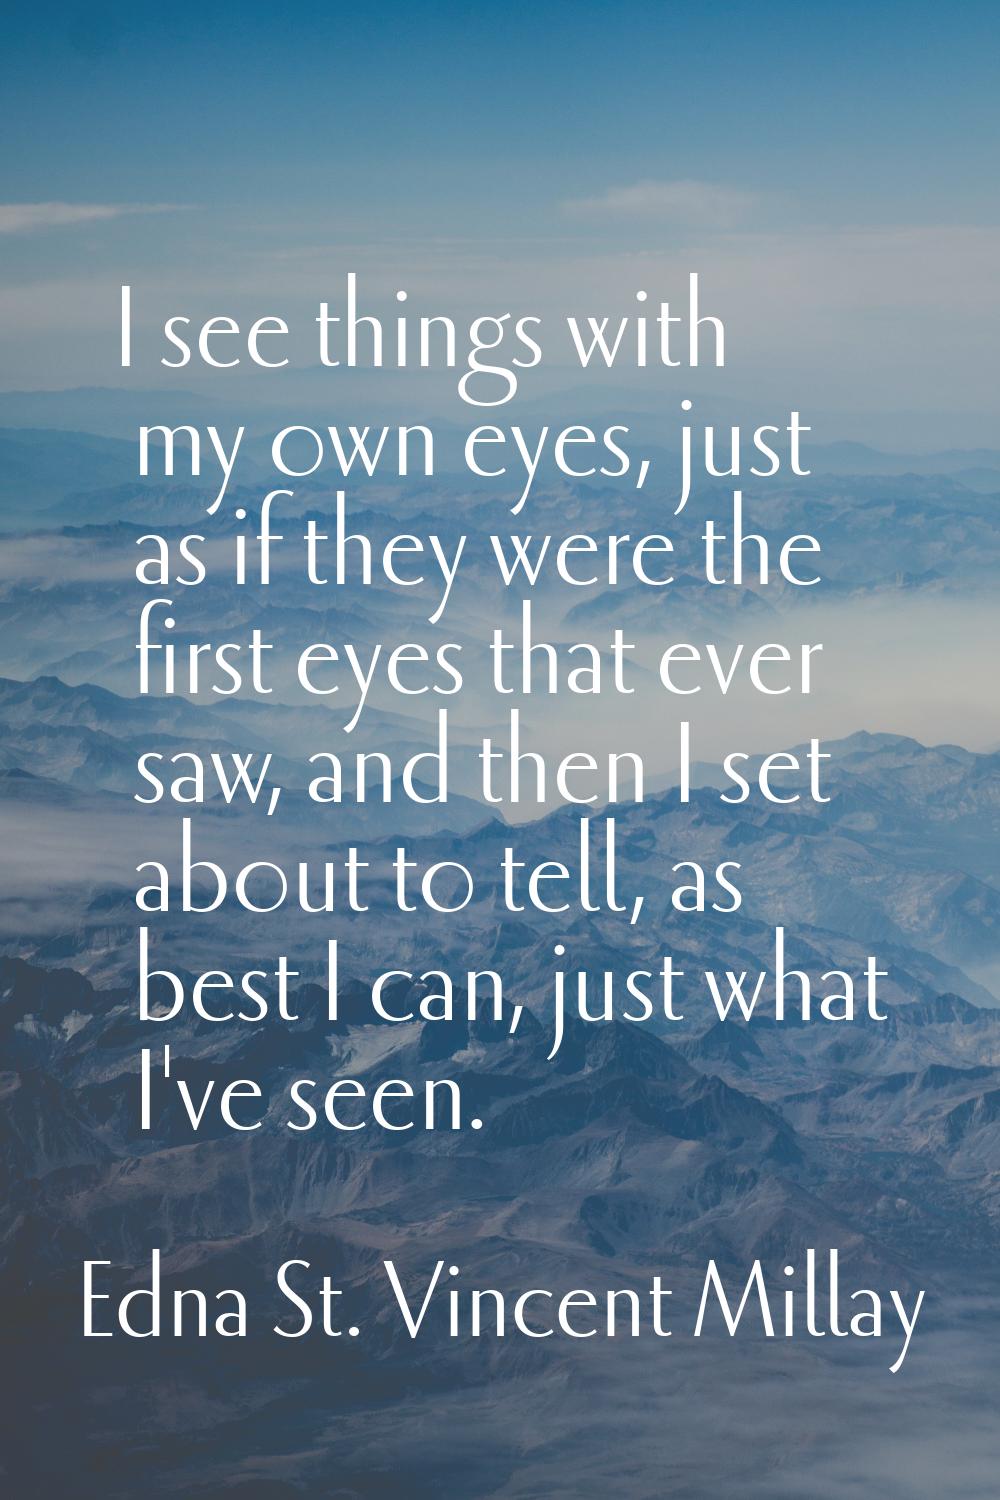 I see things with my own eyes, just as if they were the first eyes that ever saw, and then I set ab